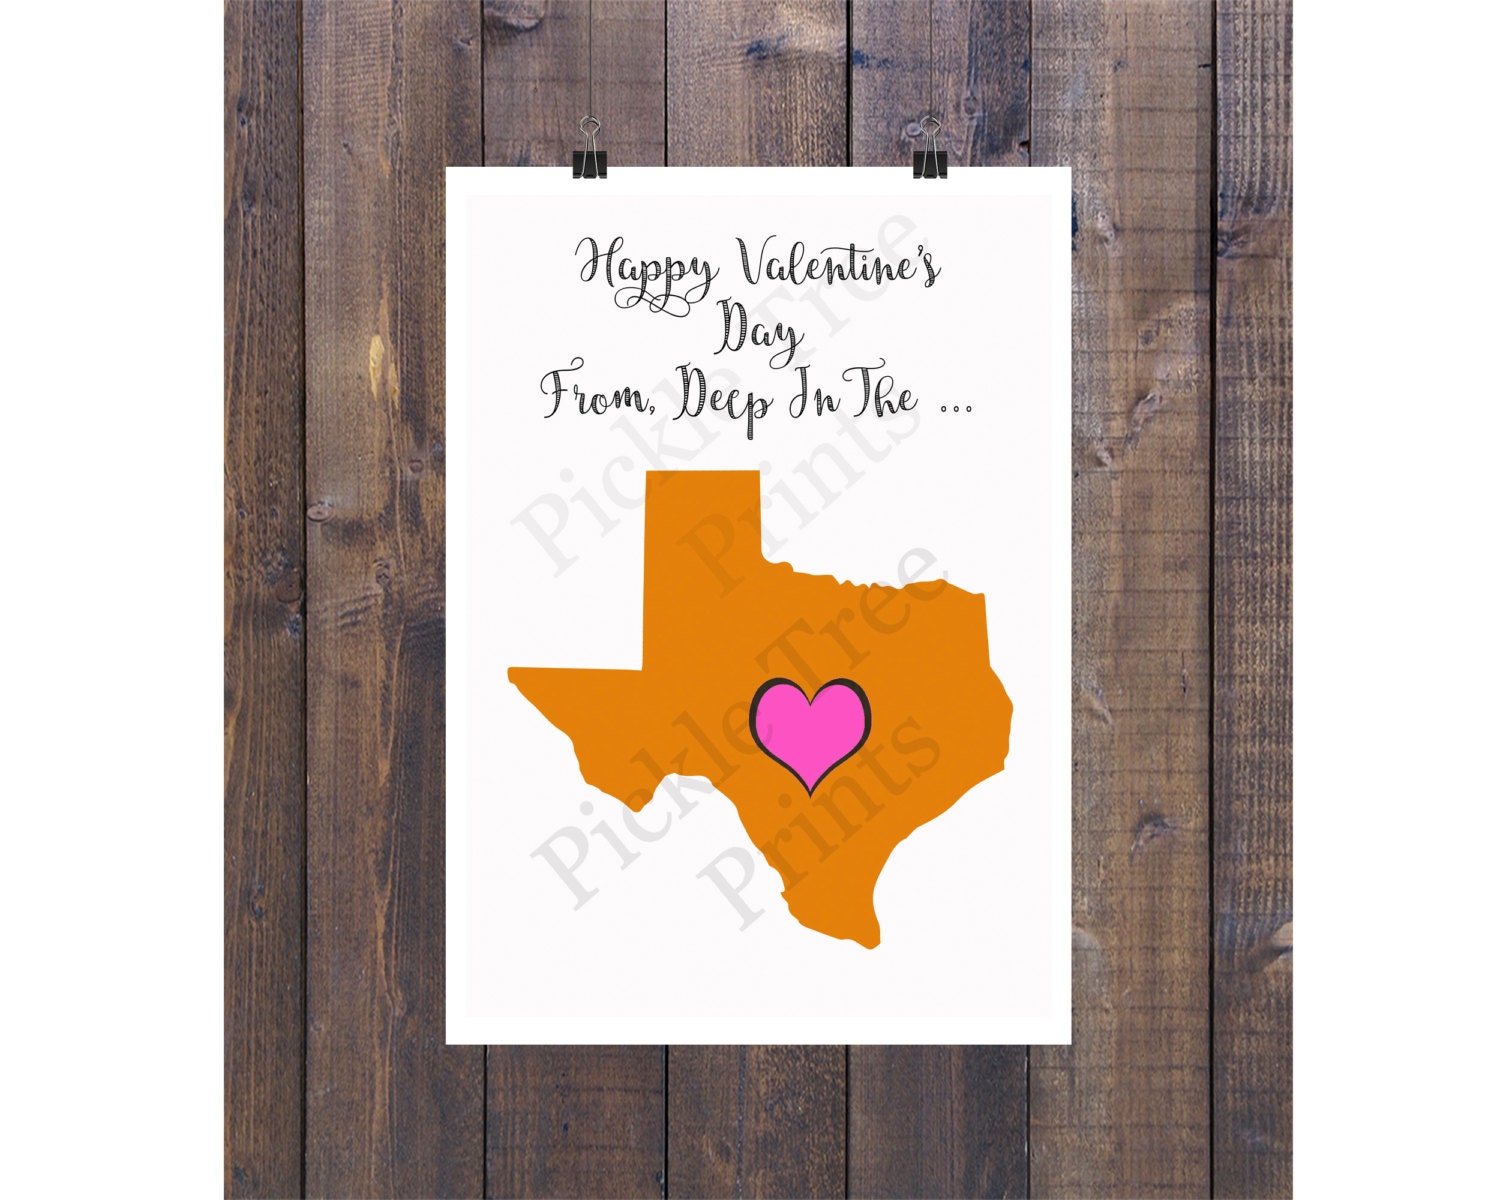 Happy Valentine's Day Card from Deep in the Heart of Texas